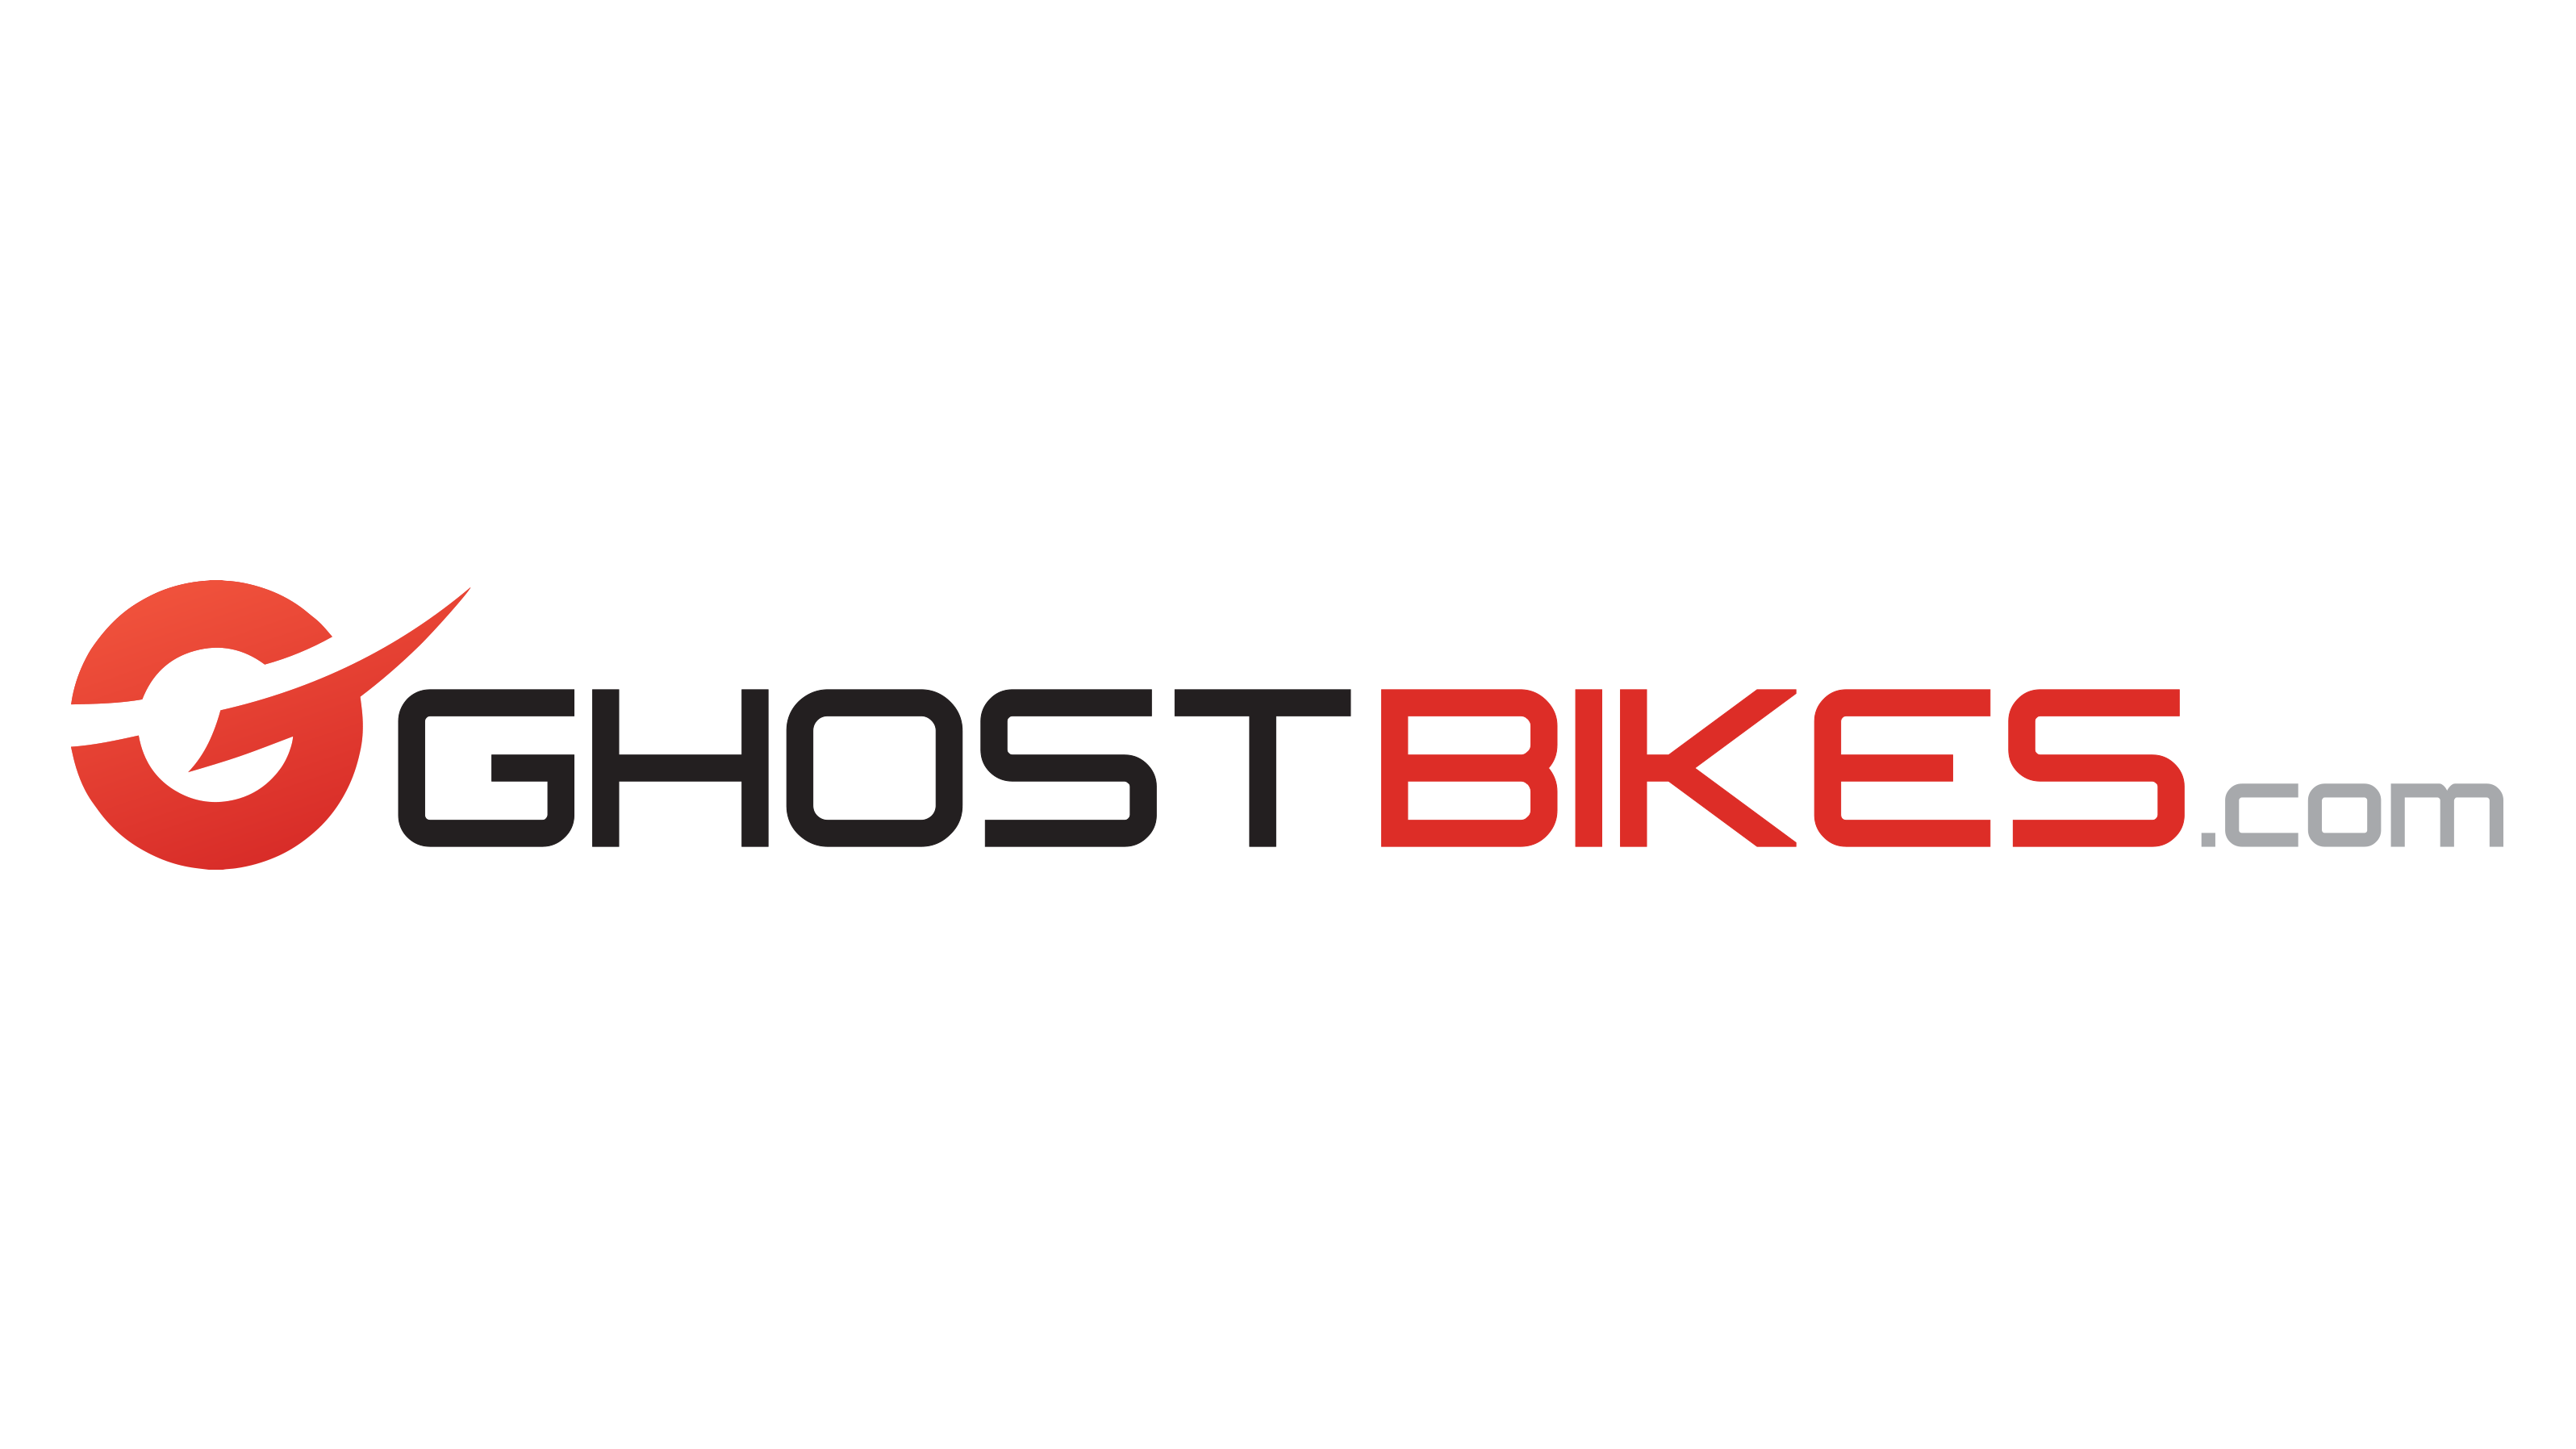 GhostBikes Coupons & Promo Codes